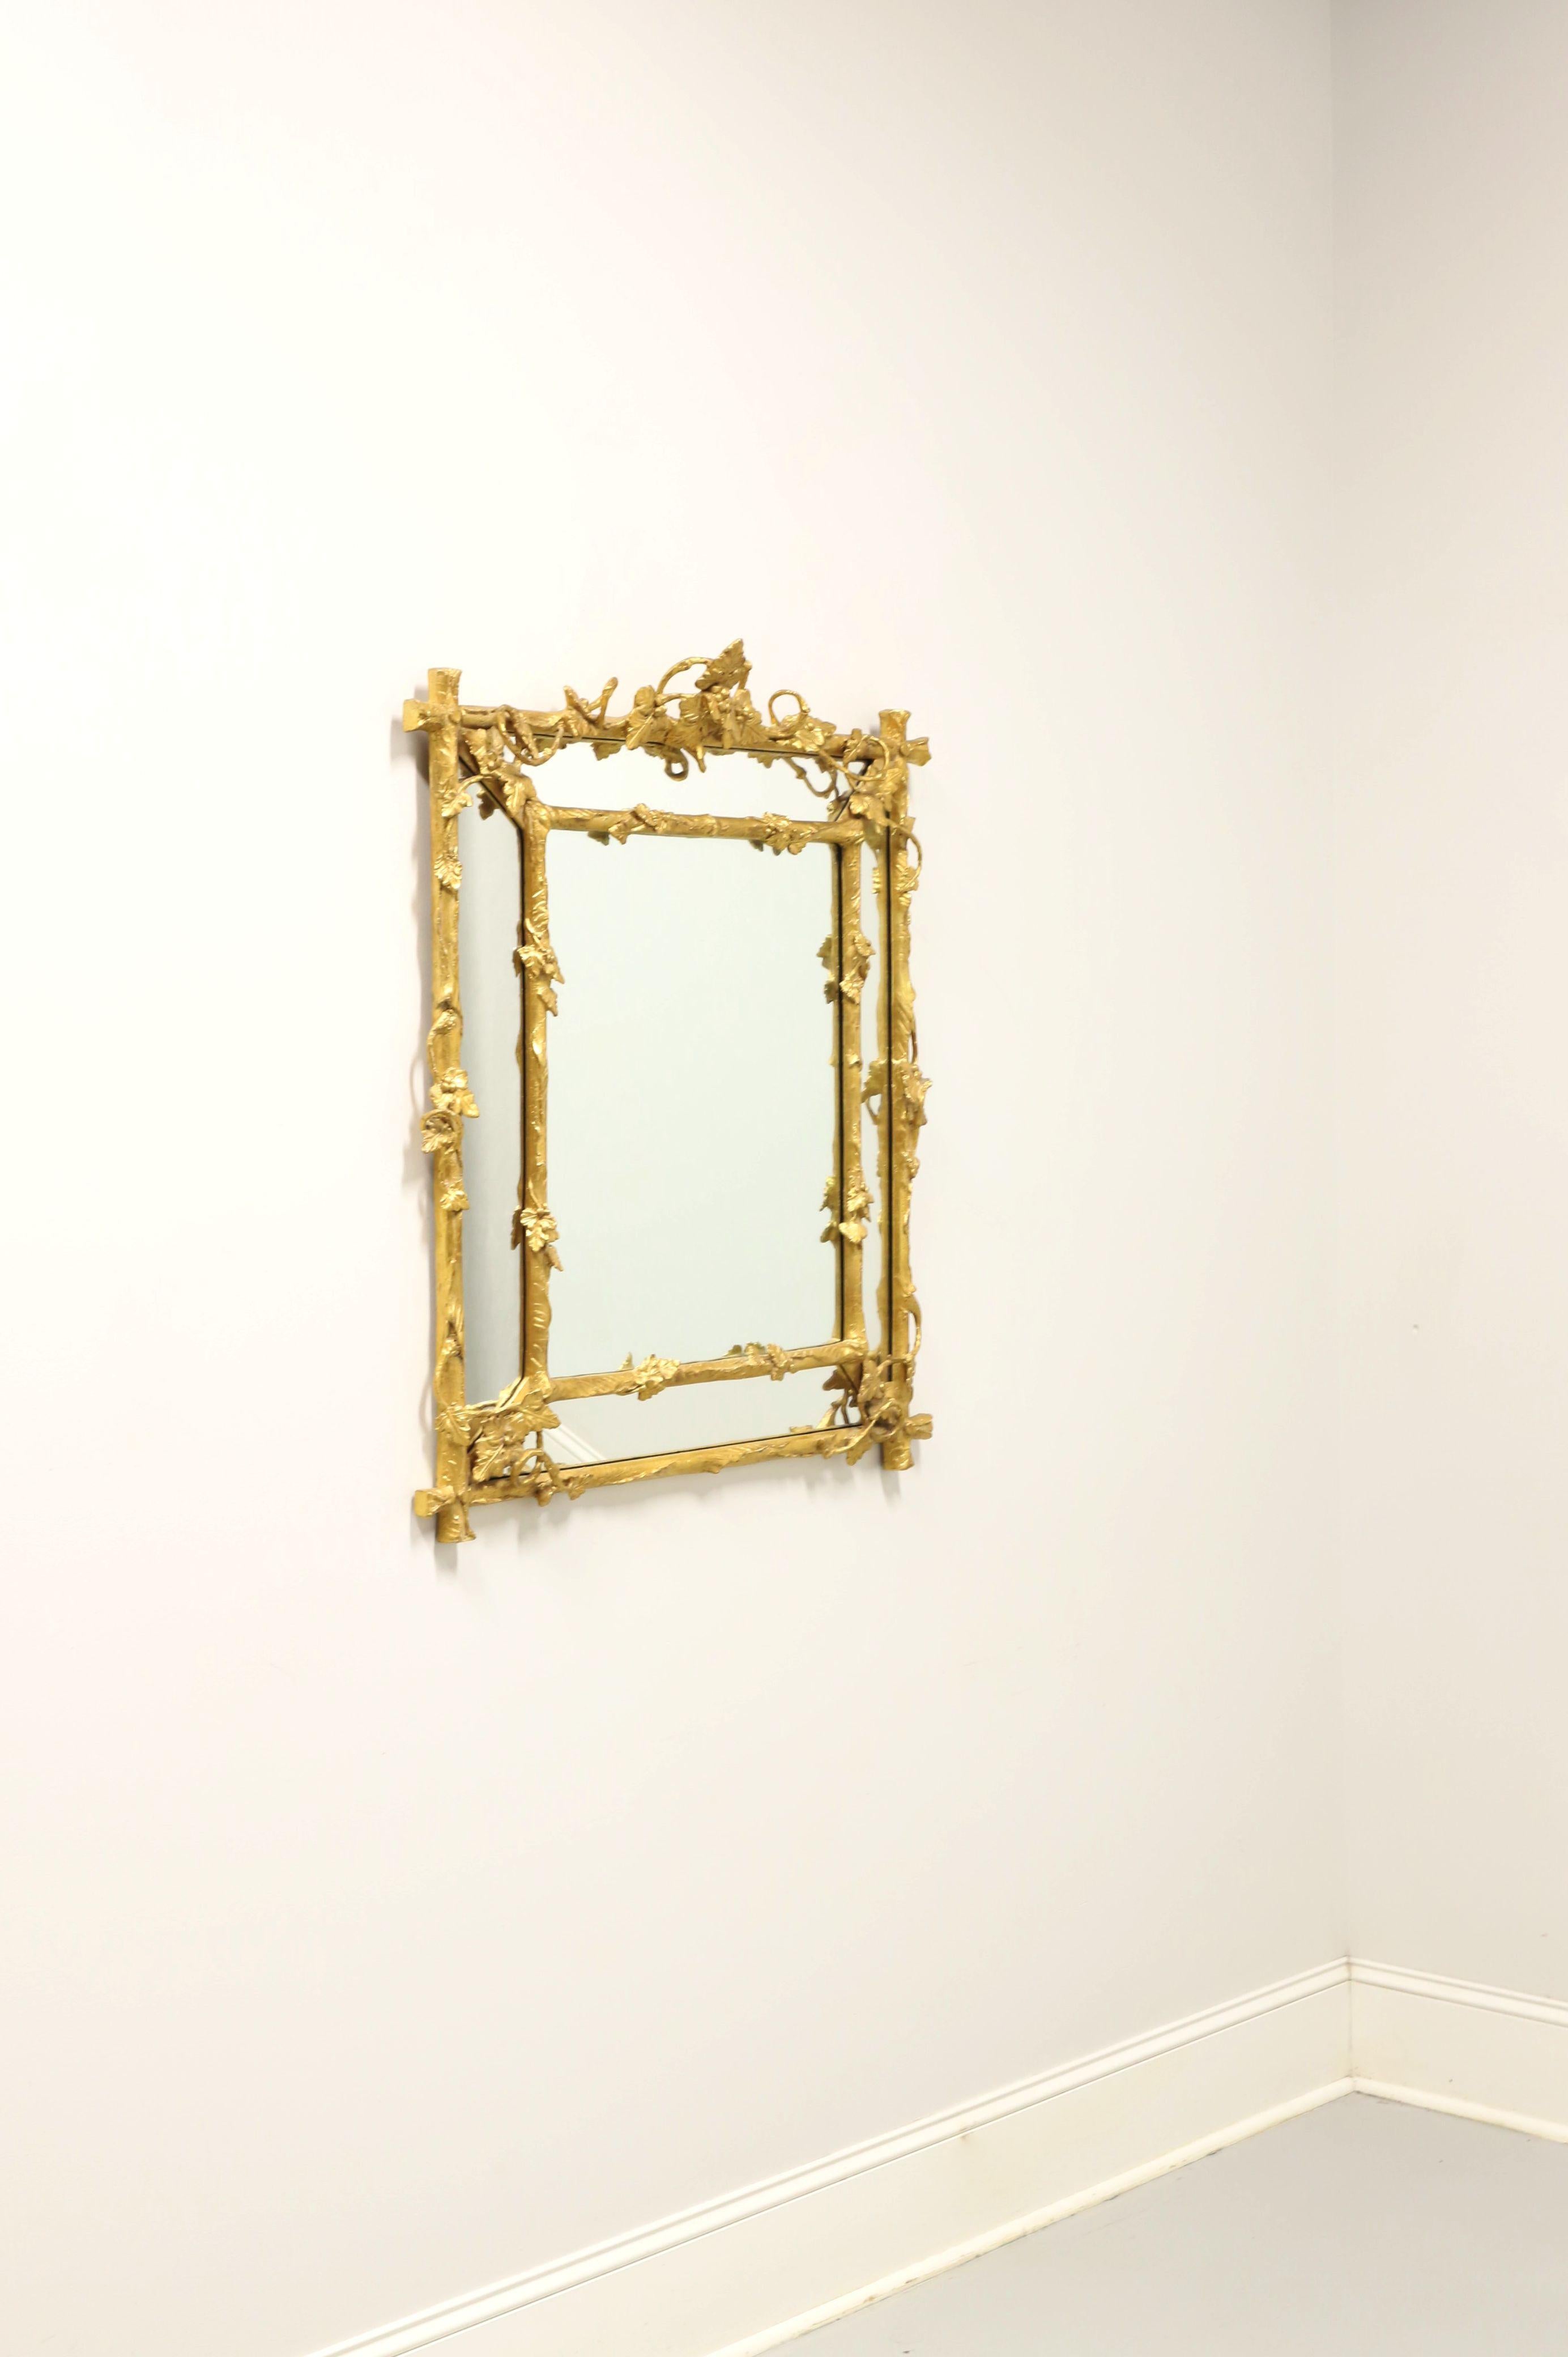 A parclose wall mirror in the French Louis XV Rococo style, unbranded, similar quality to Friedman Brothers. Mirror glass in an intricately carved gold gilt painted wood frame with large strips of mirrors surrounding the outer edges. Features a